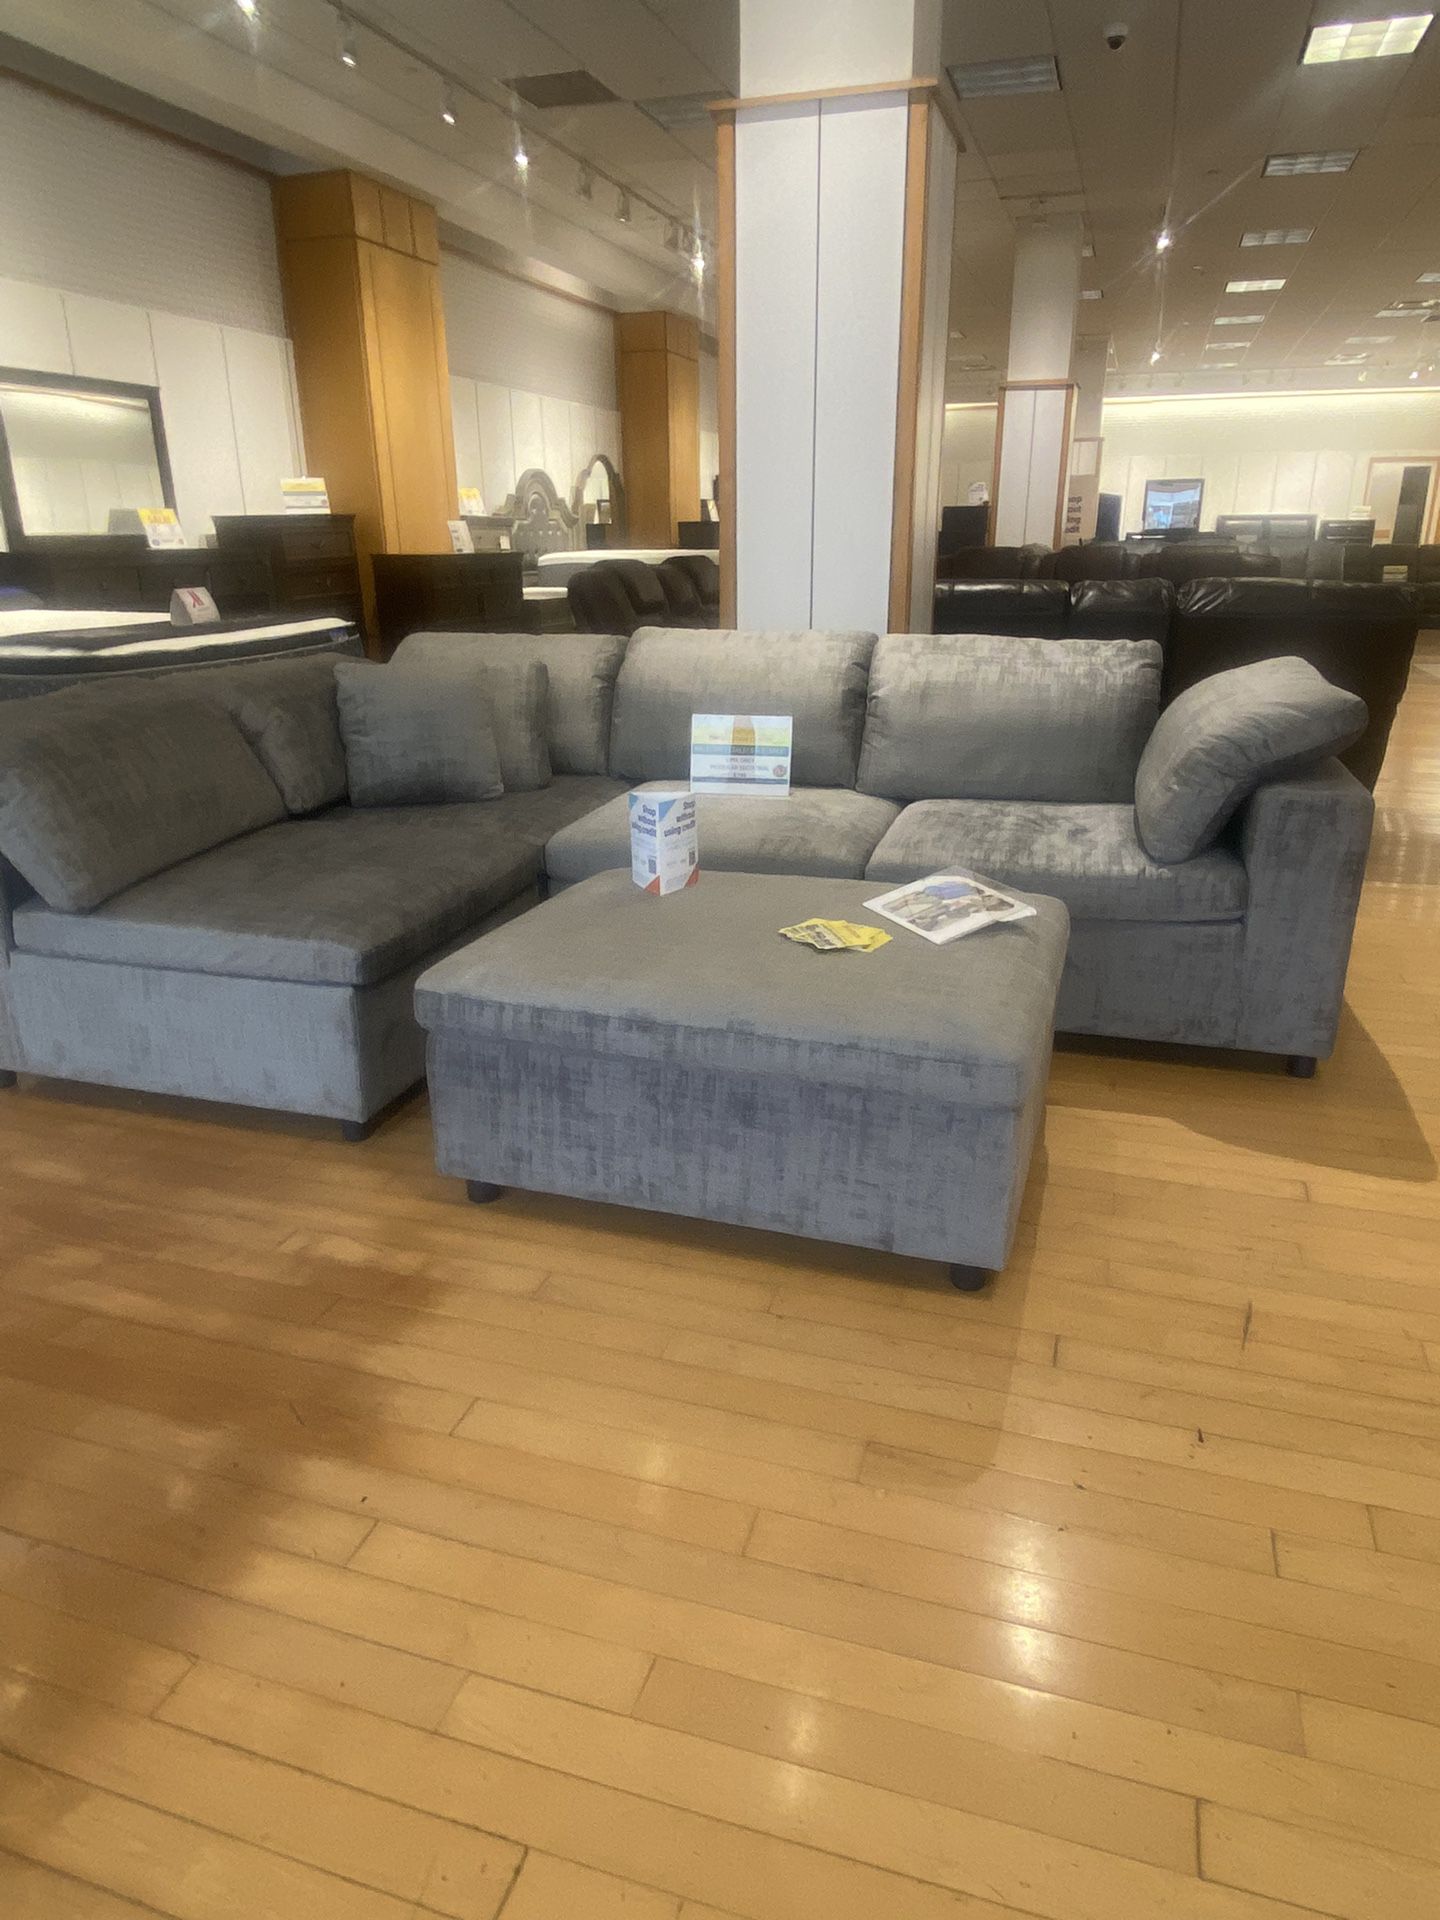 BEST SELLER! COMPARE TO CLOUD SOFA AND SAVE! DELIVERY TODAY! ALL CREDITS WELCOME! 